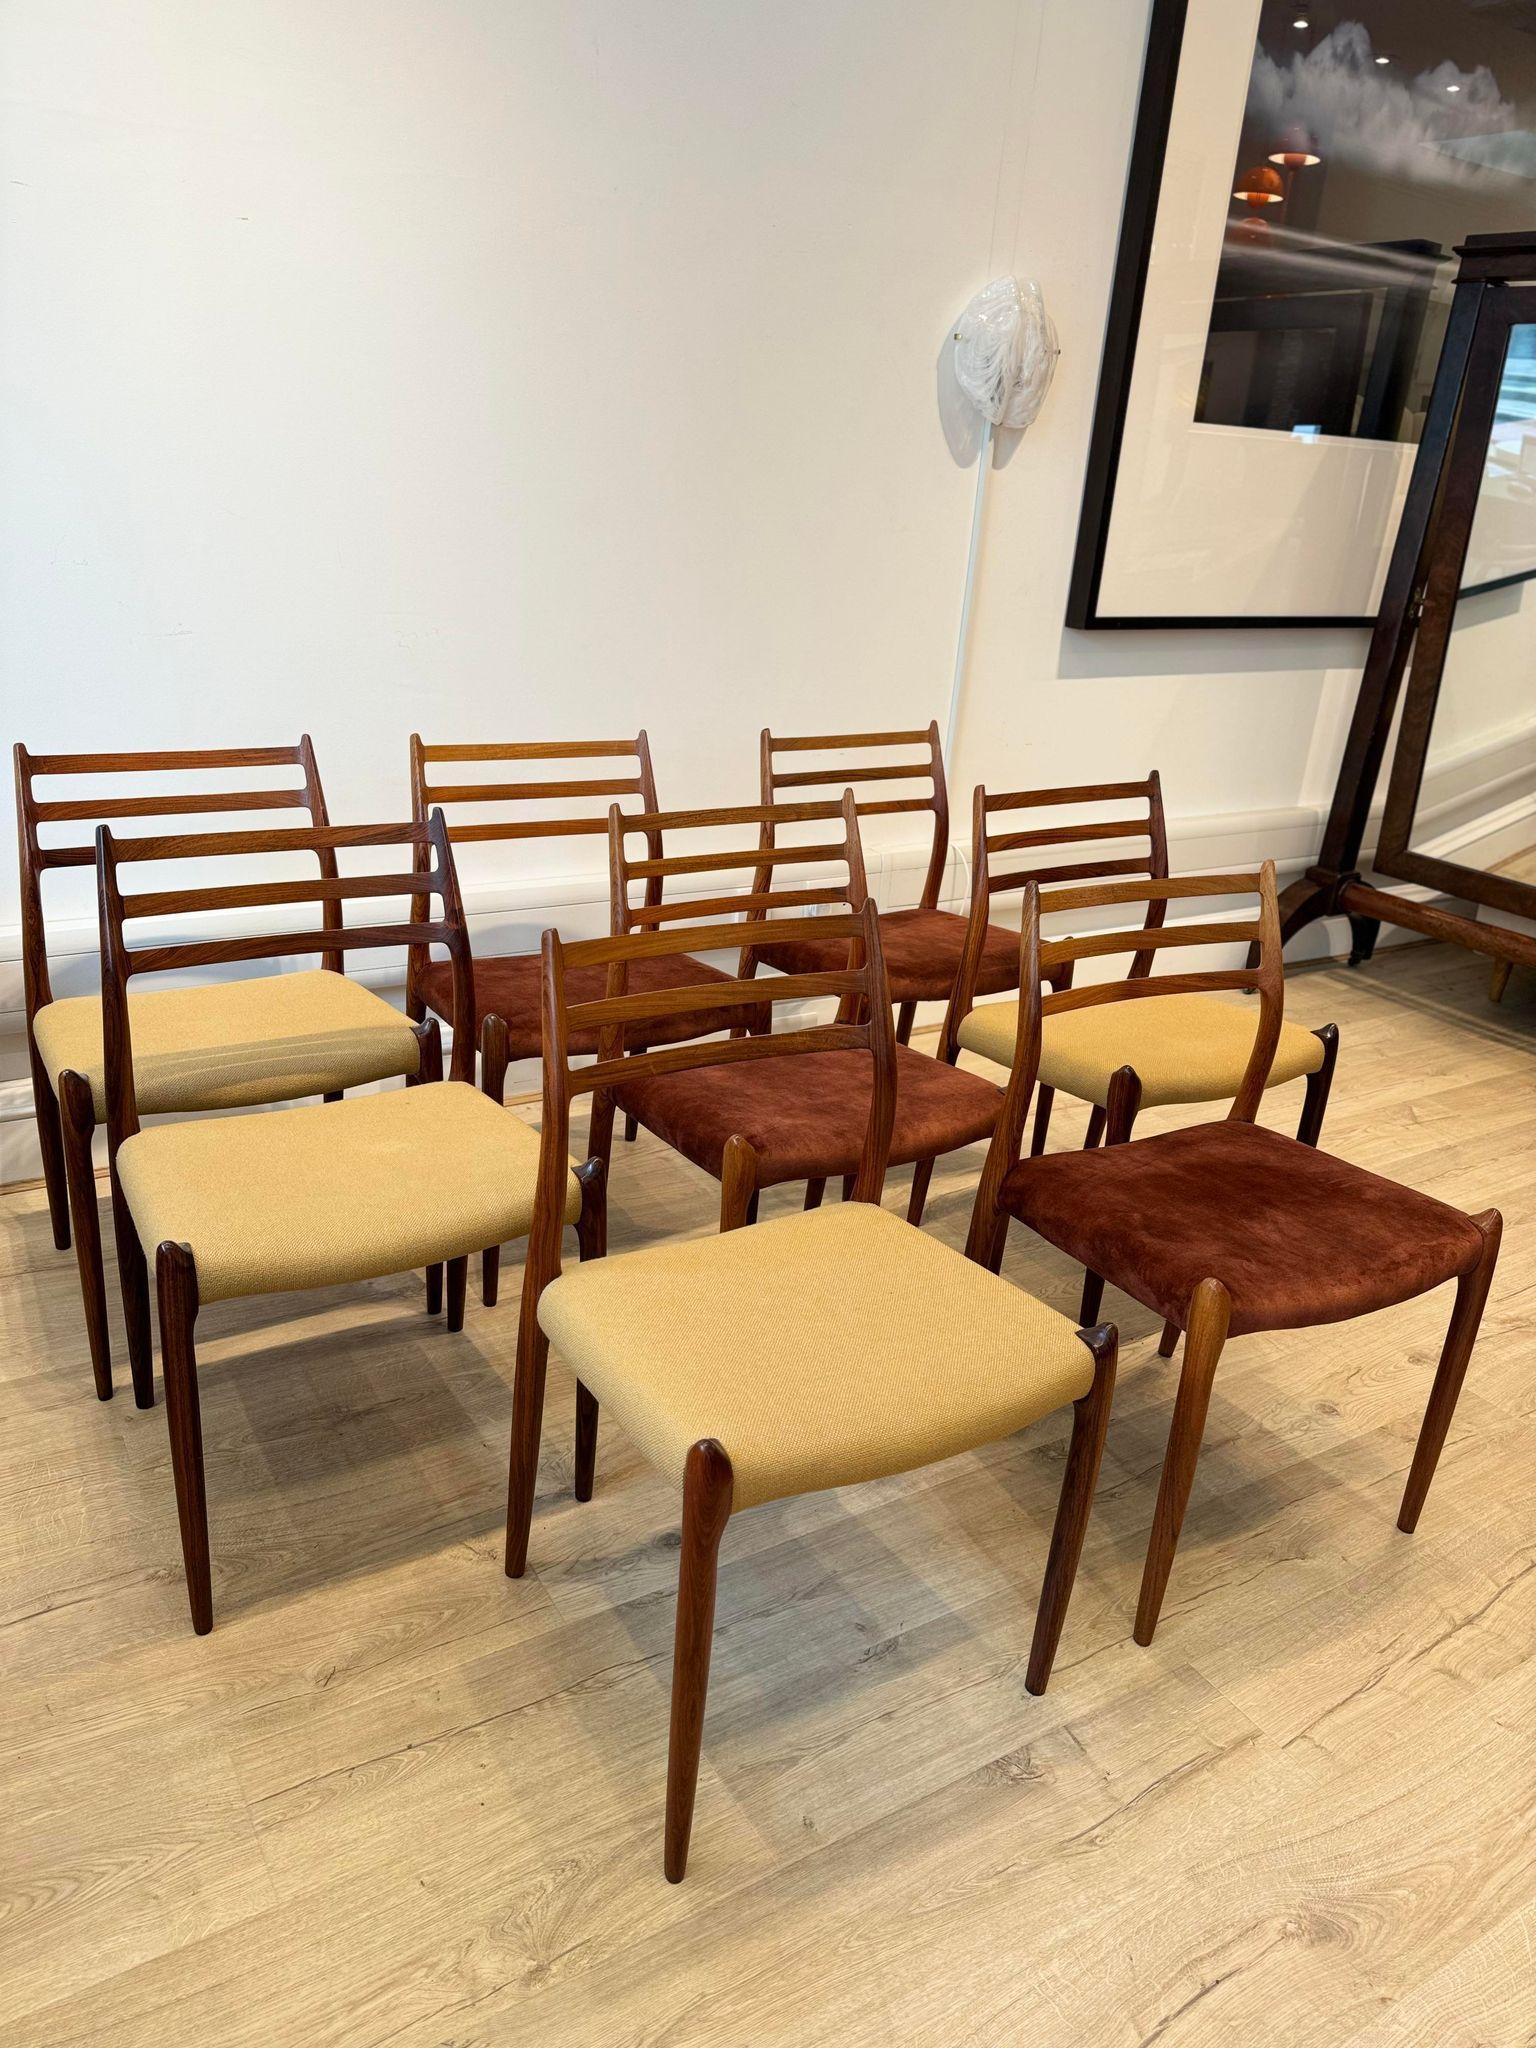 Set Of 8 Danish Dining Chairs, designed in the 1950s by Niels Otto Møller. Produced by J. L. Møller Møbelfabrik.

These chairs feature beautiful Rosewood frames, this set has two different upholstery - 4 being in a woven hopsack and 4 being in